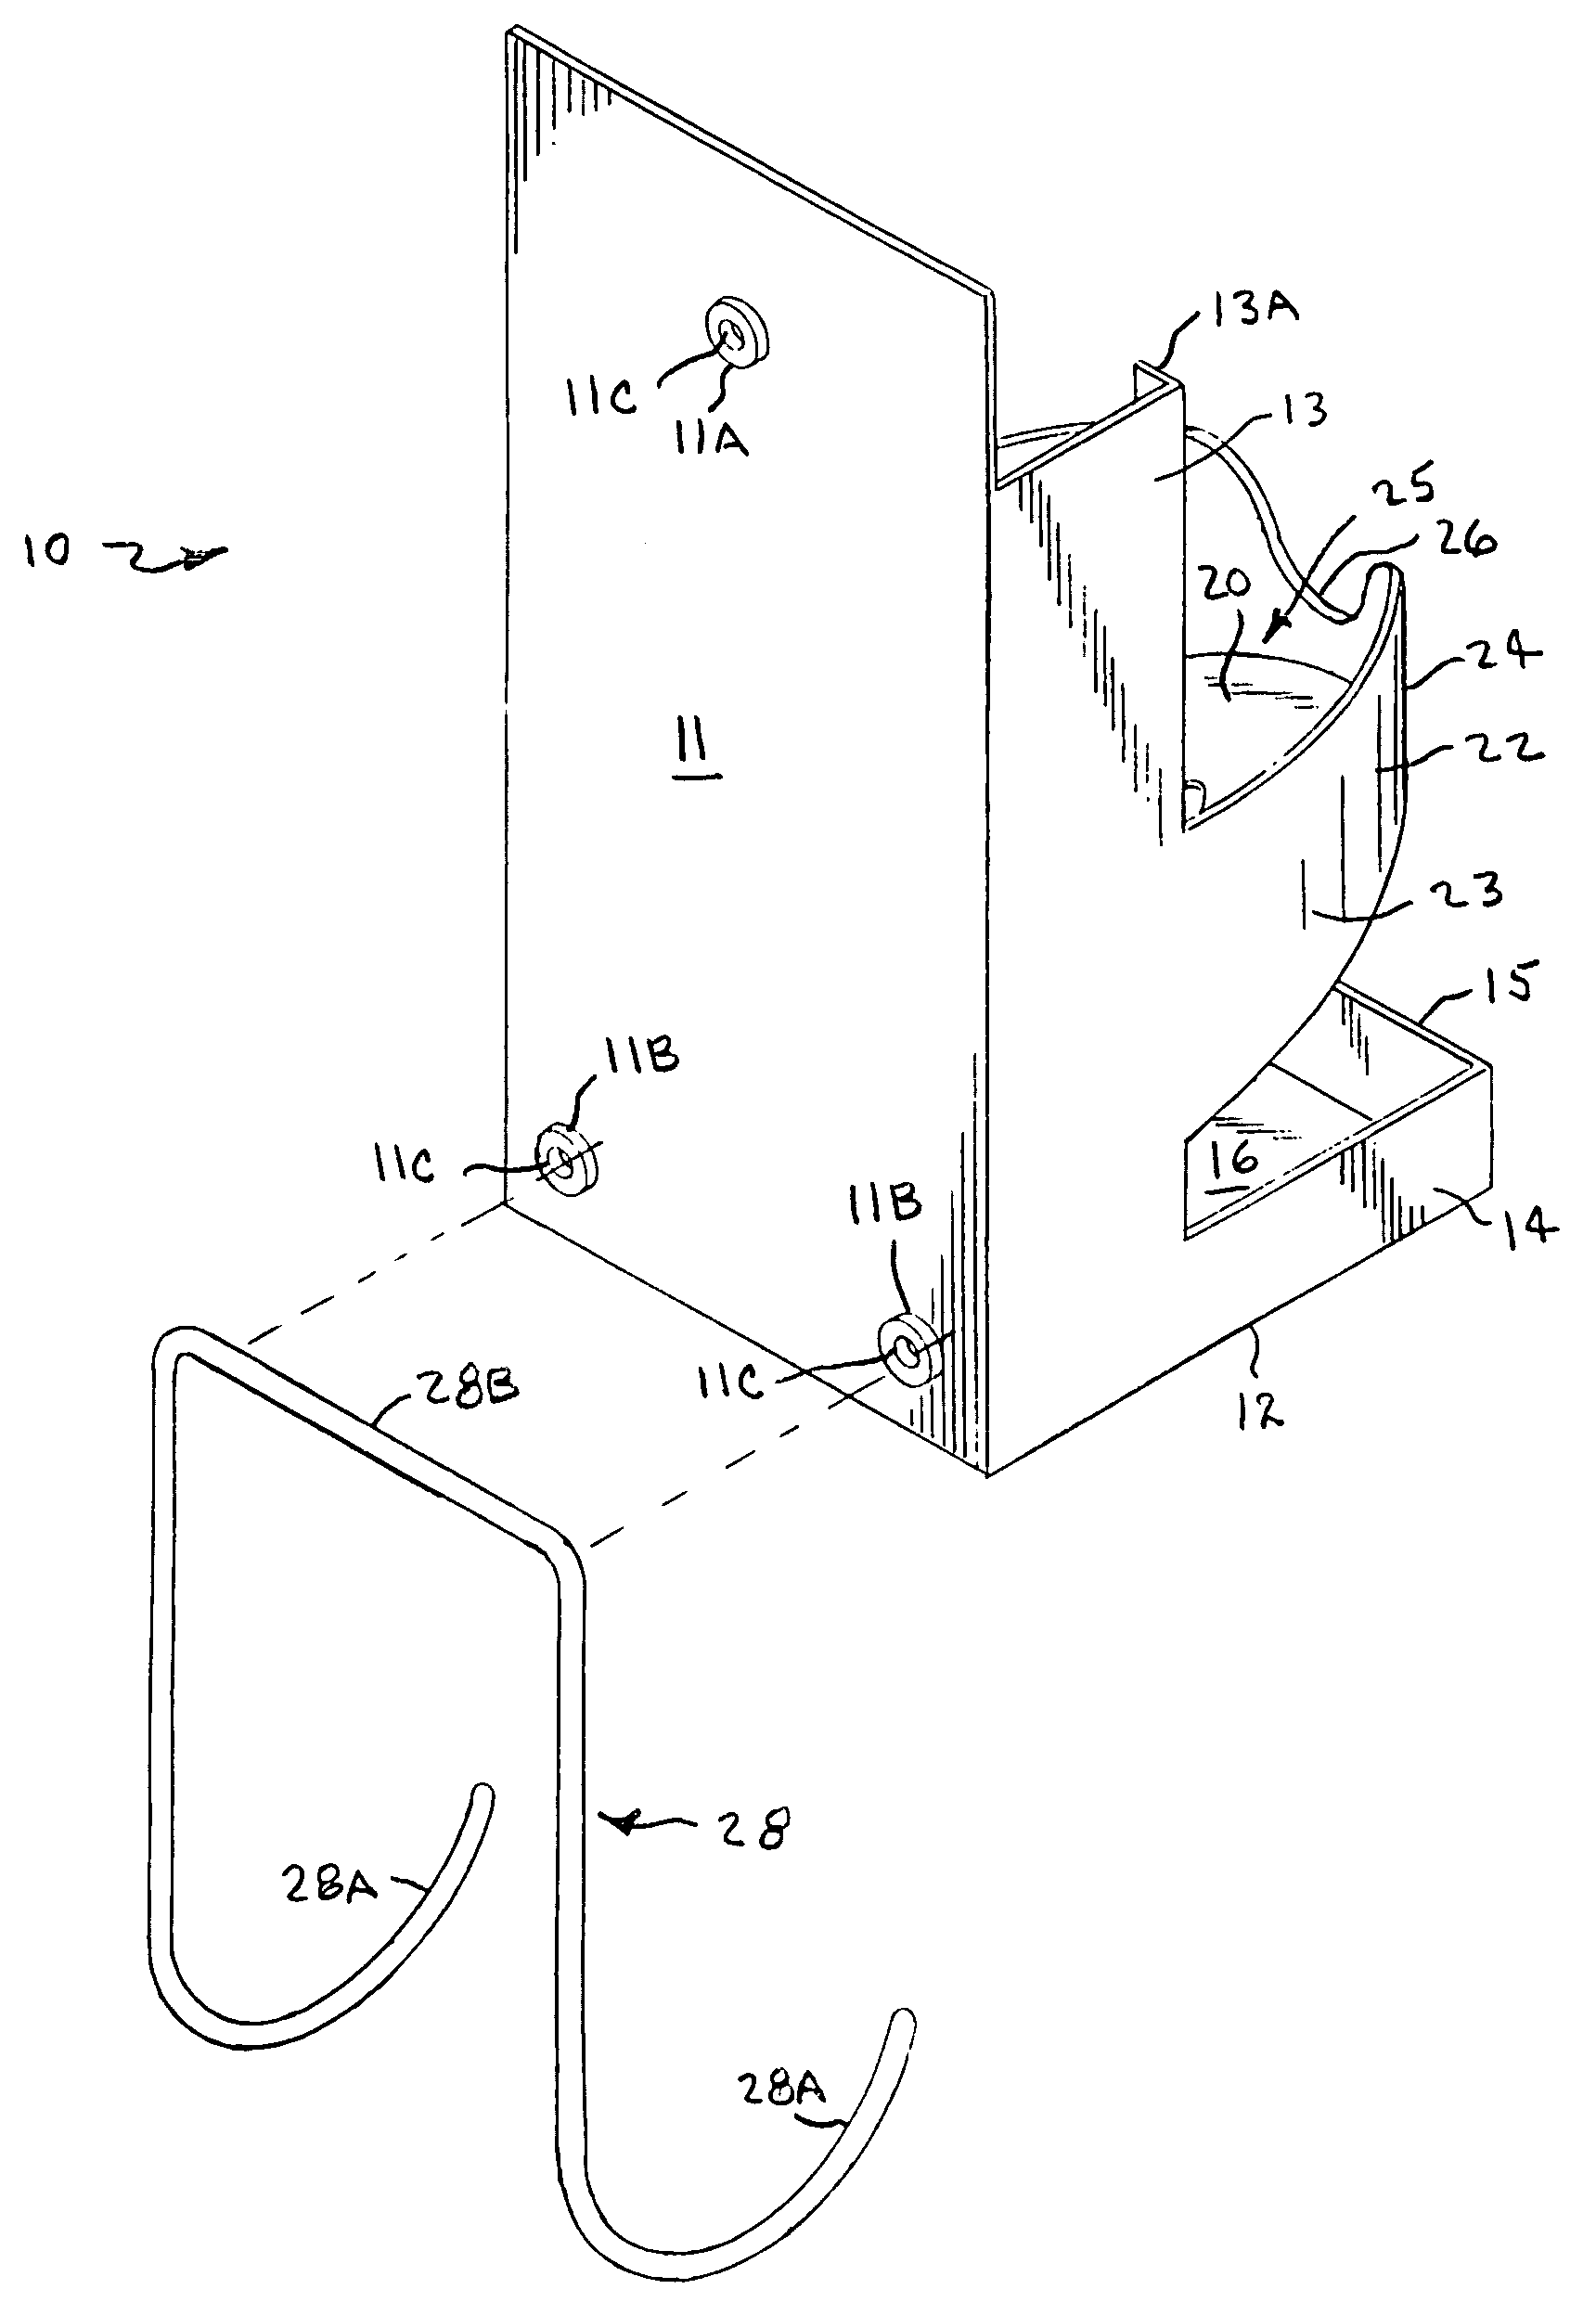 Iron holder with drain and reservoir